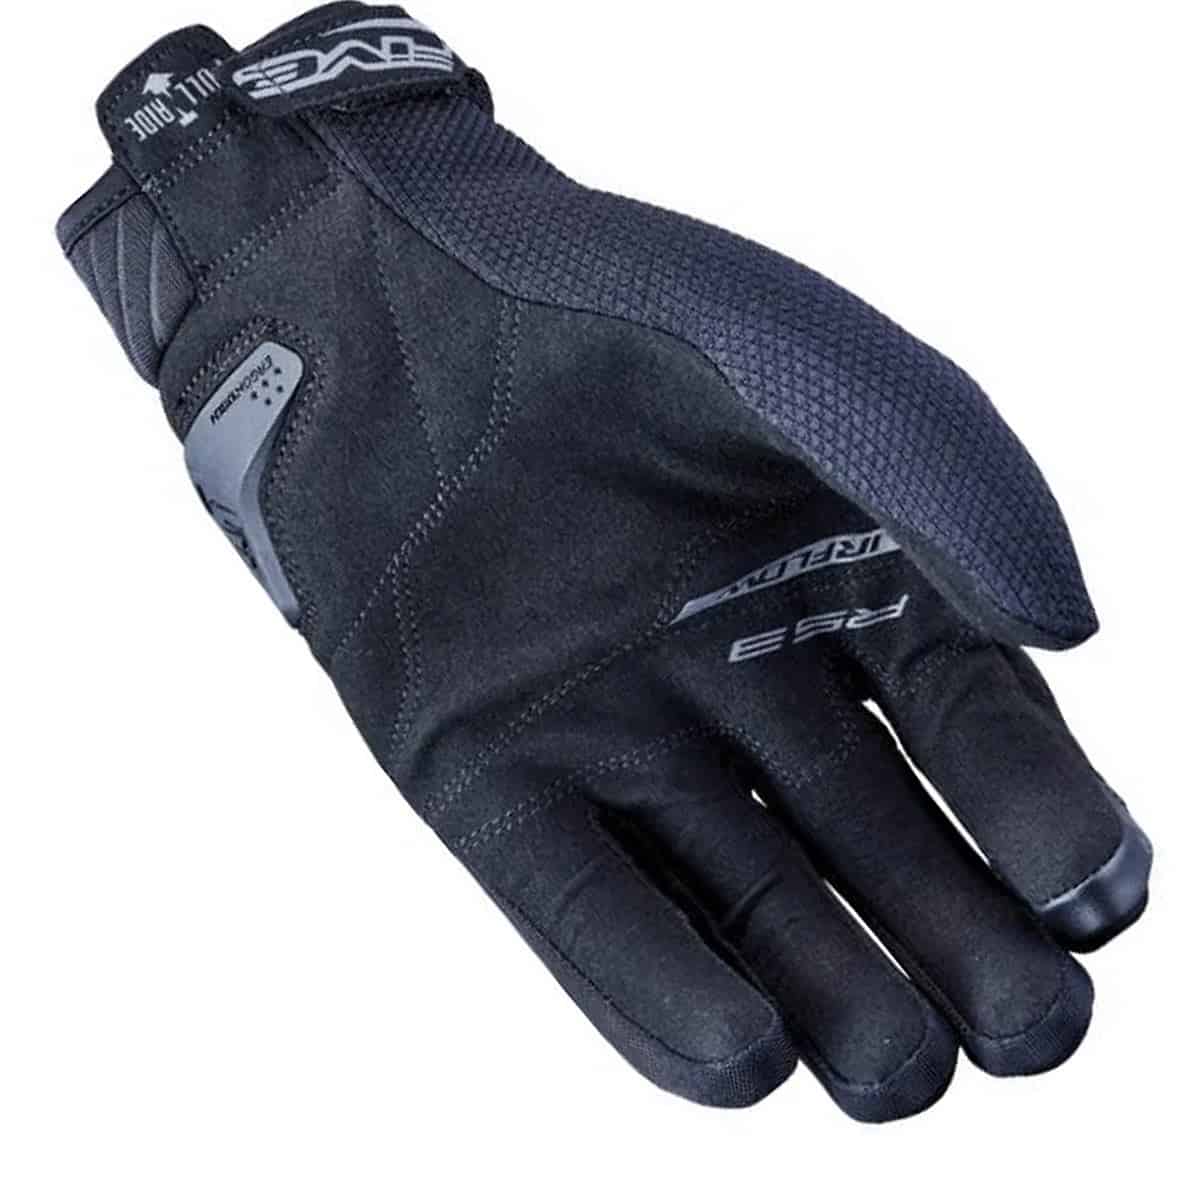 Five RS3 Evo Airflow Gloves: Comfortable, well-priced air mesh gloves palm